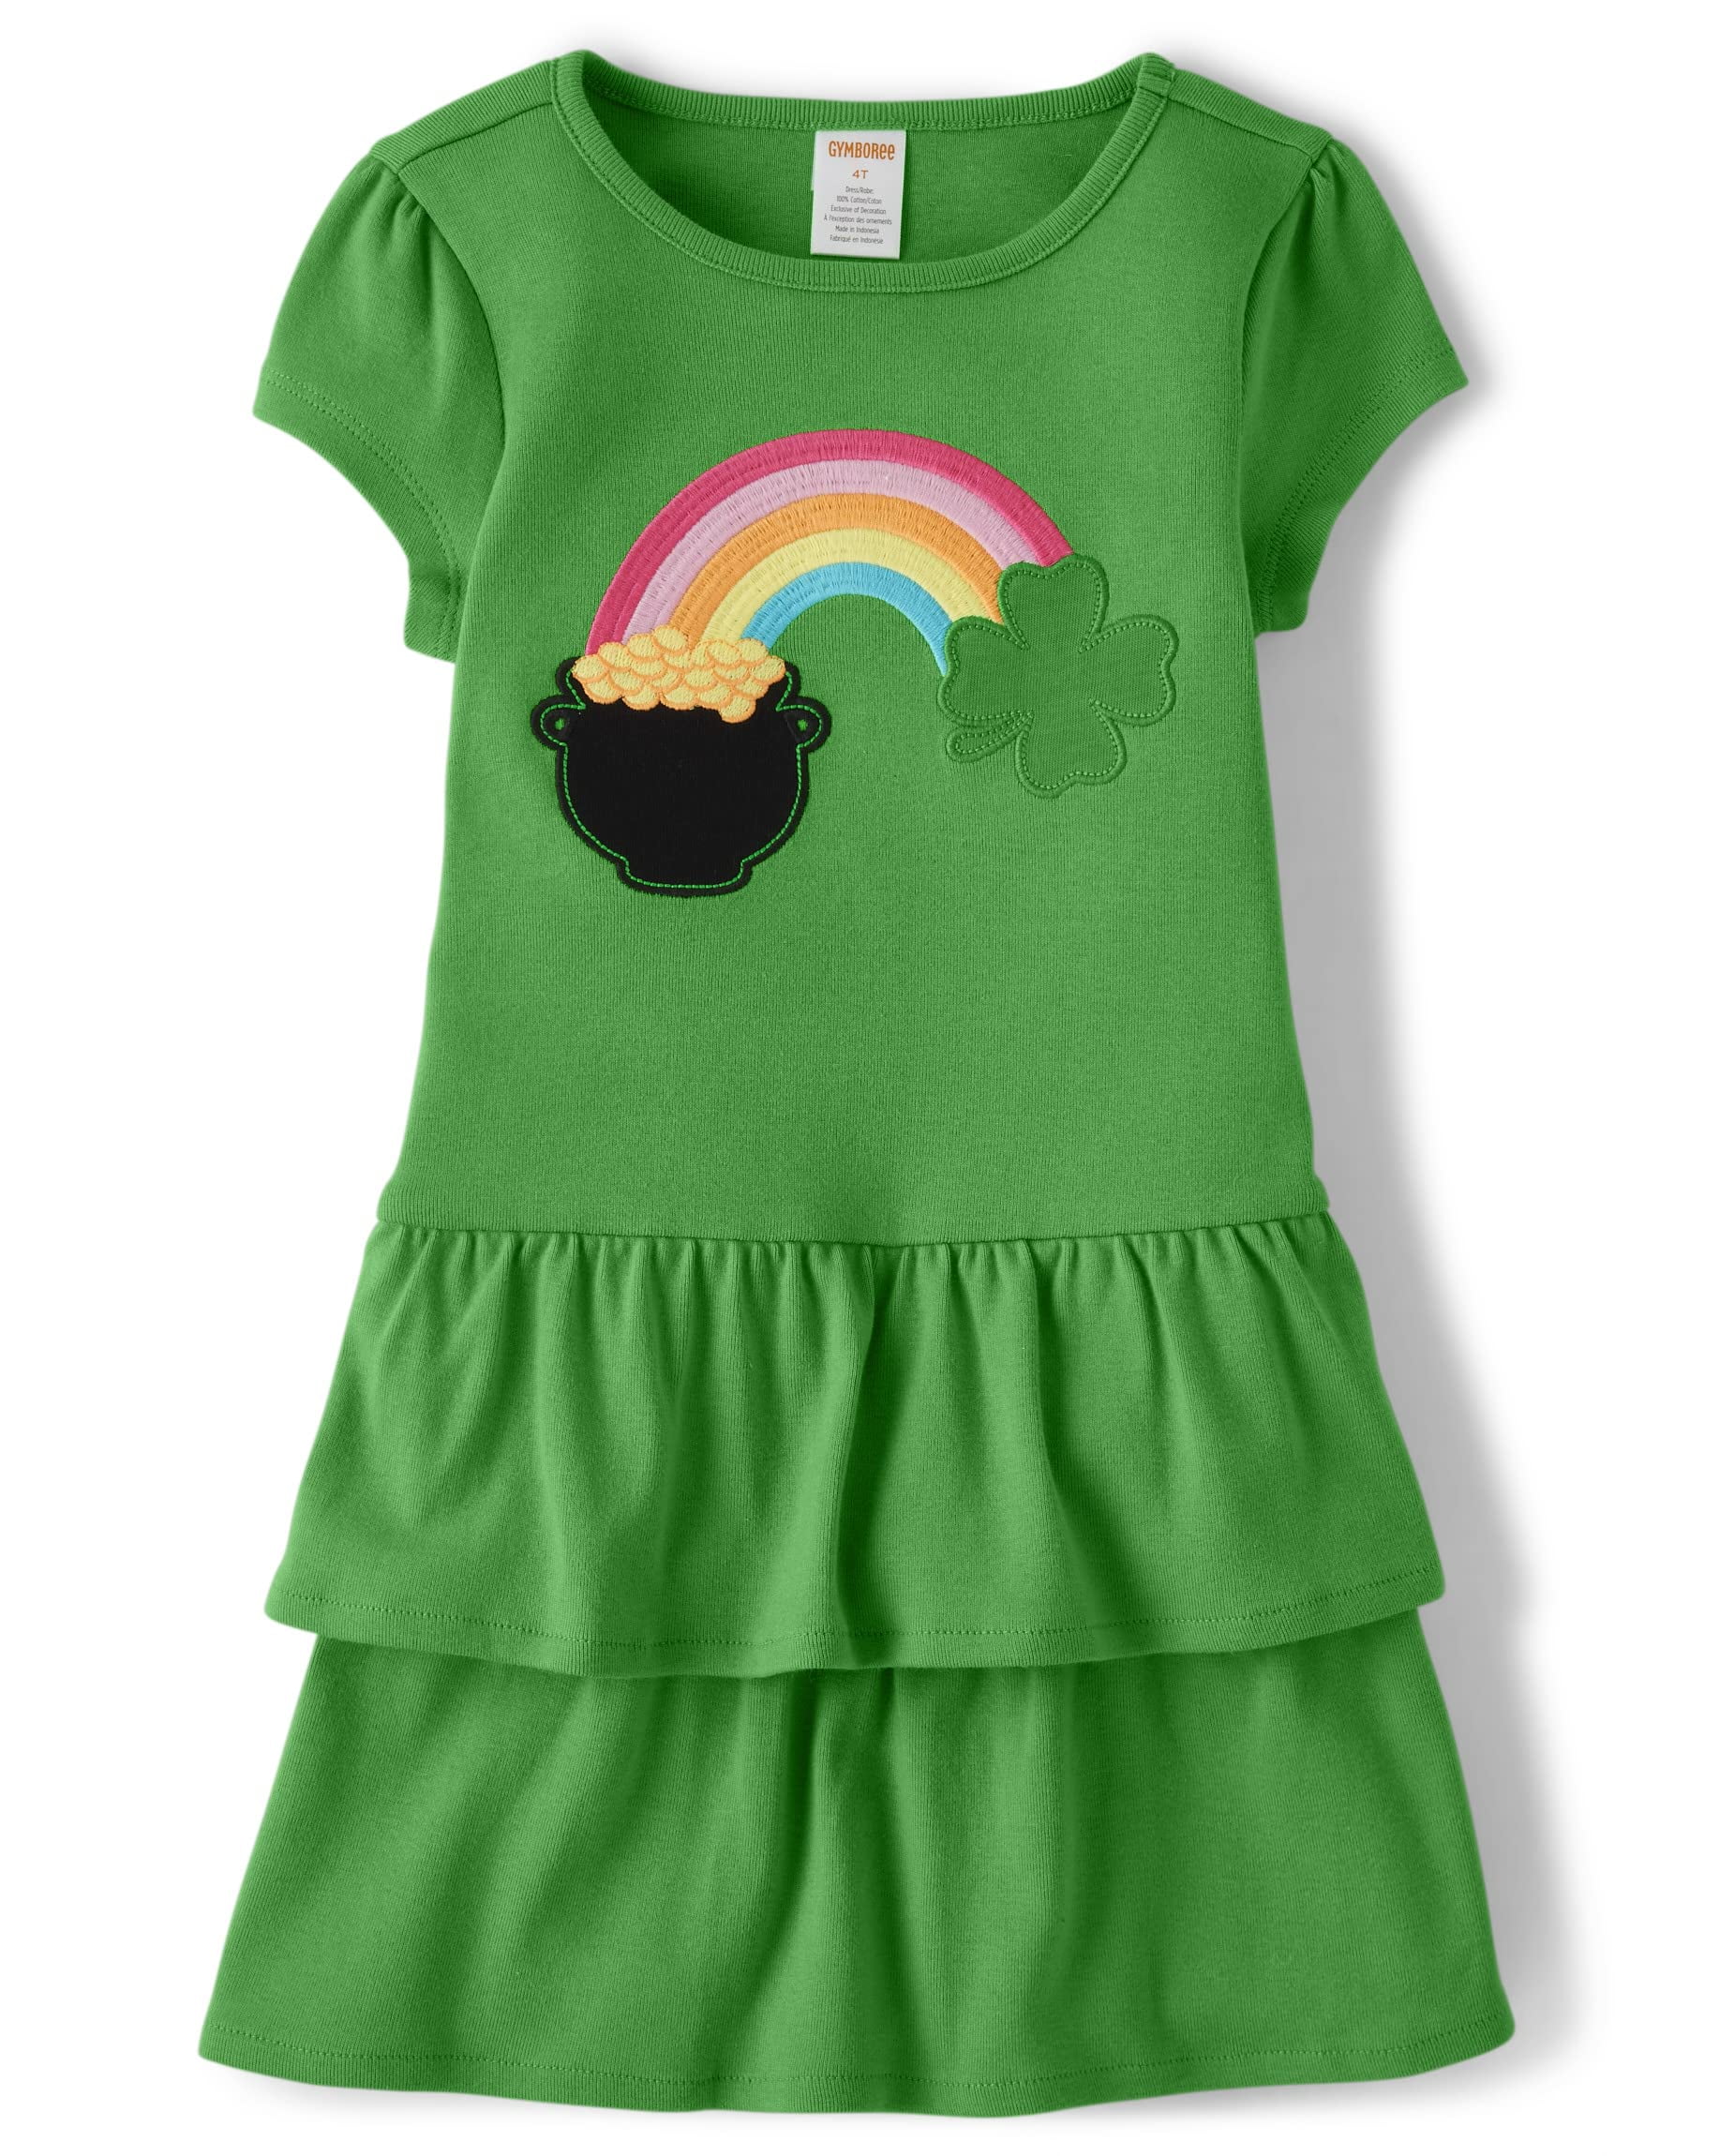 Gymboree,Girls,and Toddler Embroidered Short Sleeve Dress,Pot of